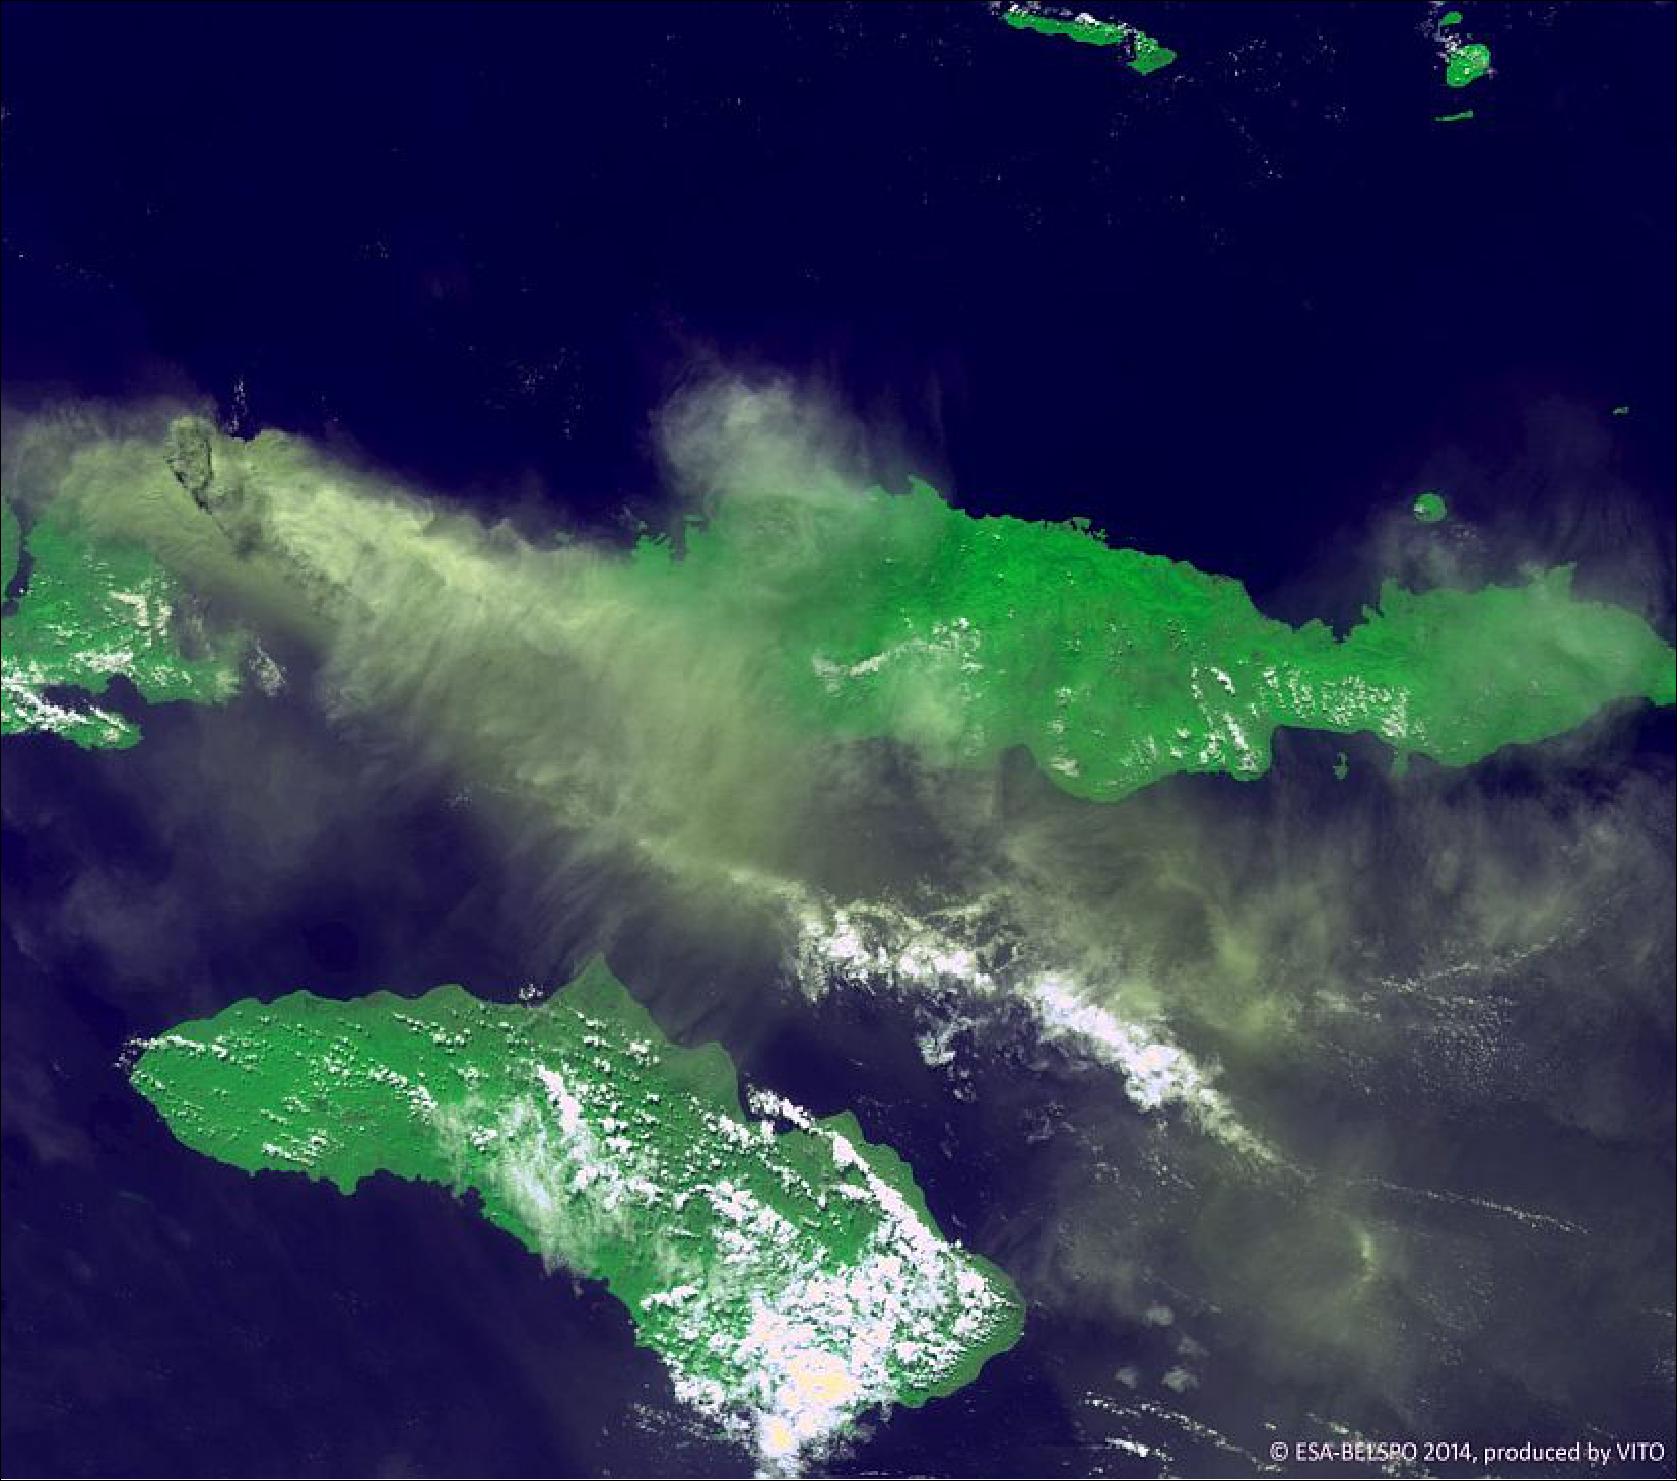 Figure 56: PROBA-V images an Indonesian volcano, acquired on May 31, 2014 at a resolution of 300 m (image credit: ESA, VITO)